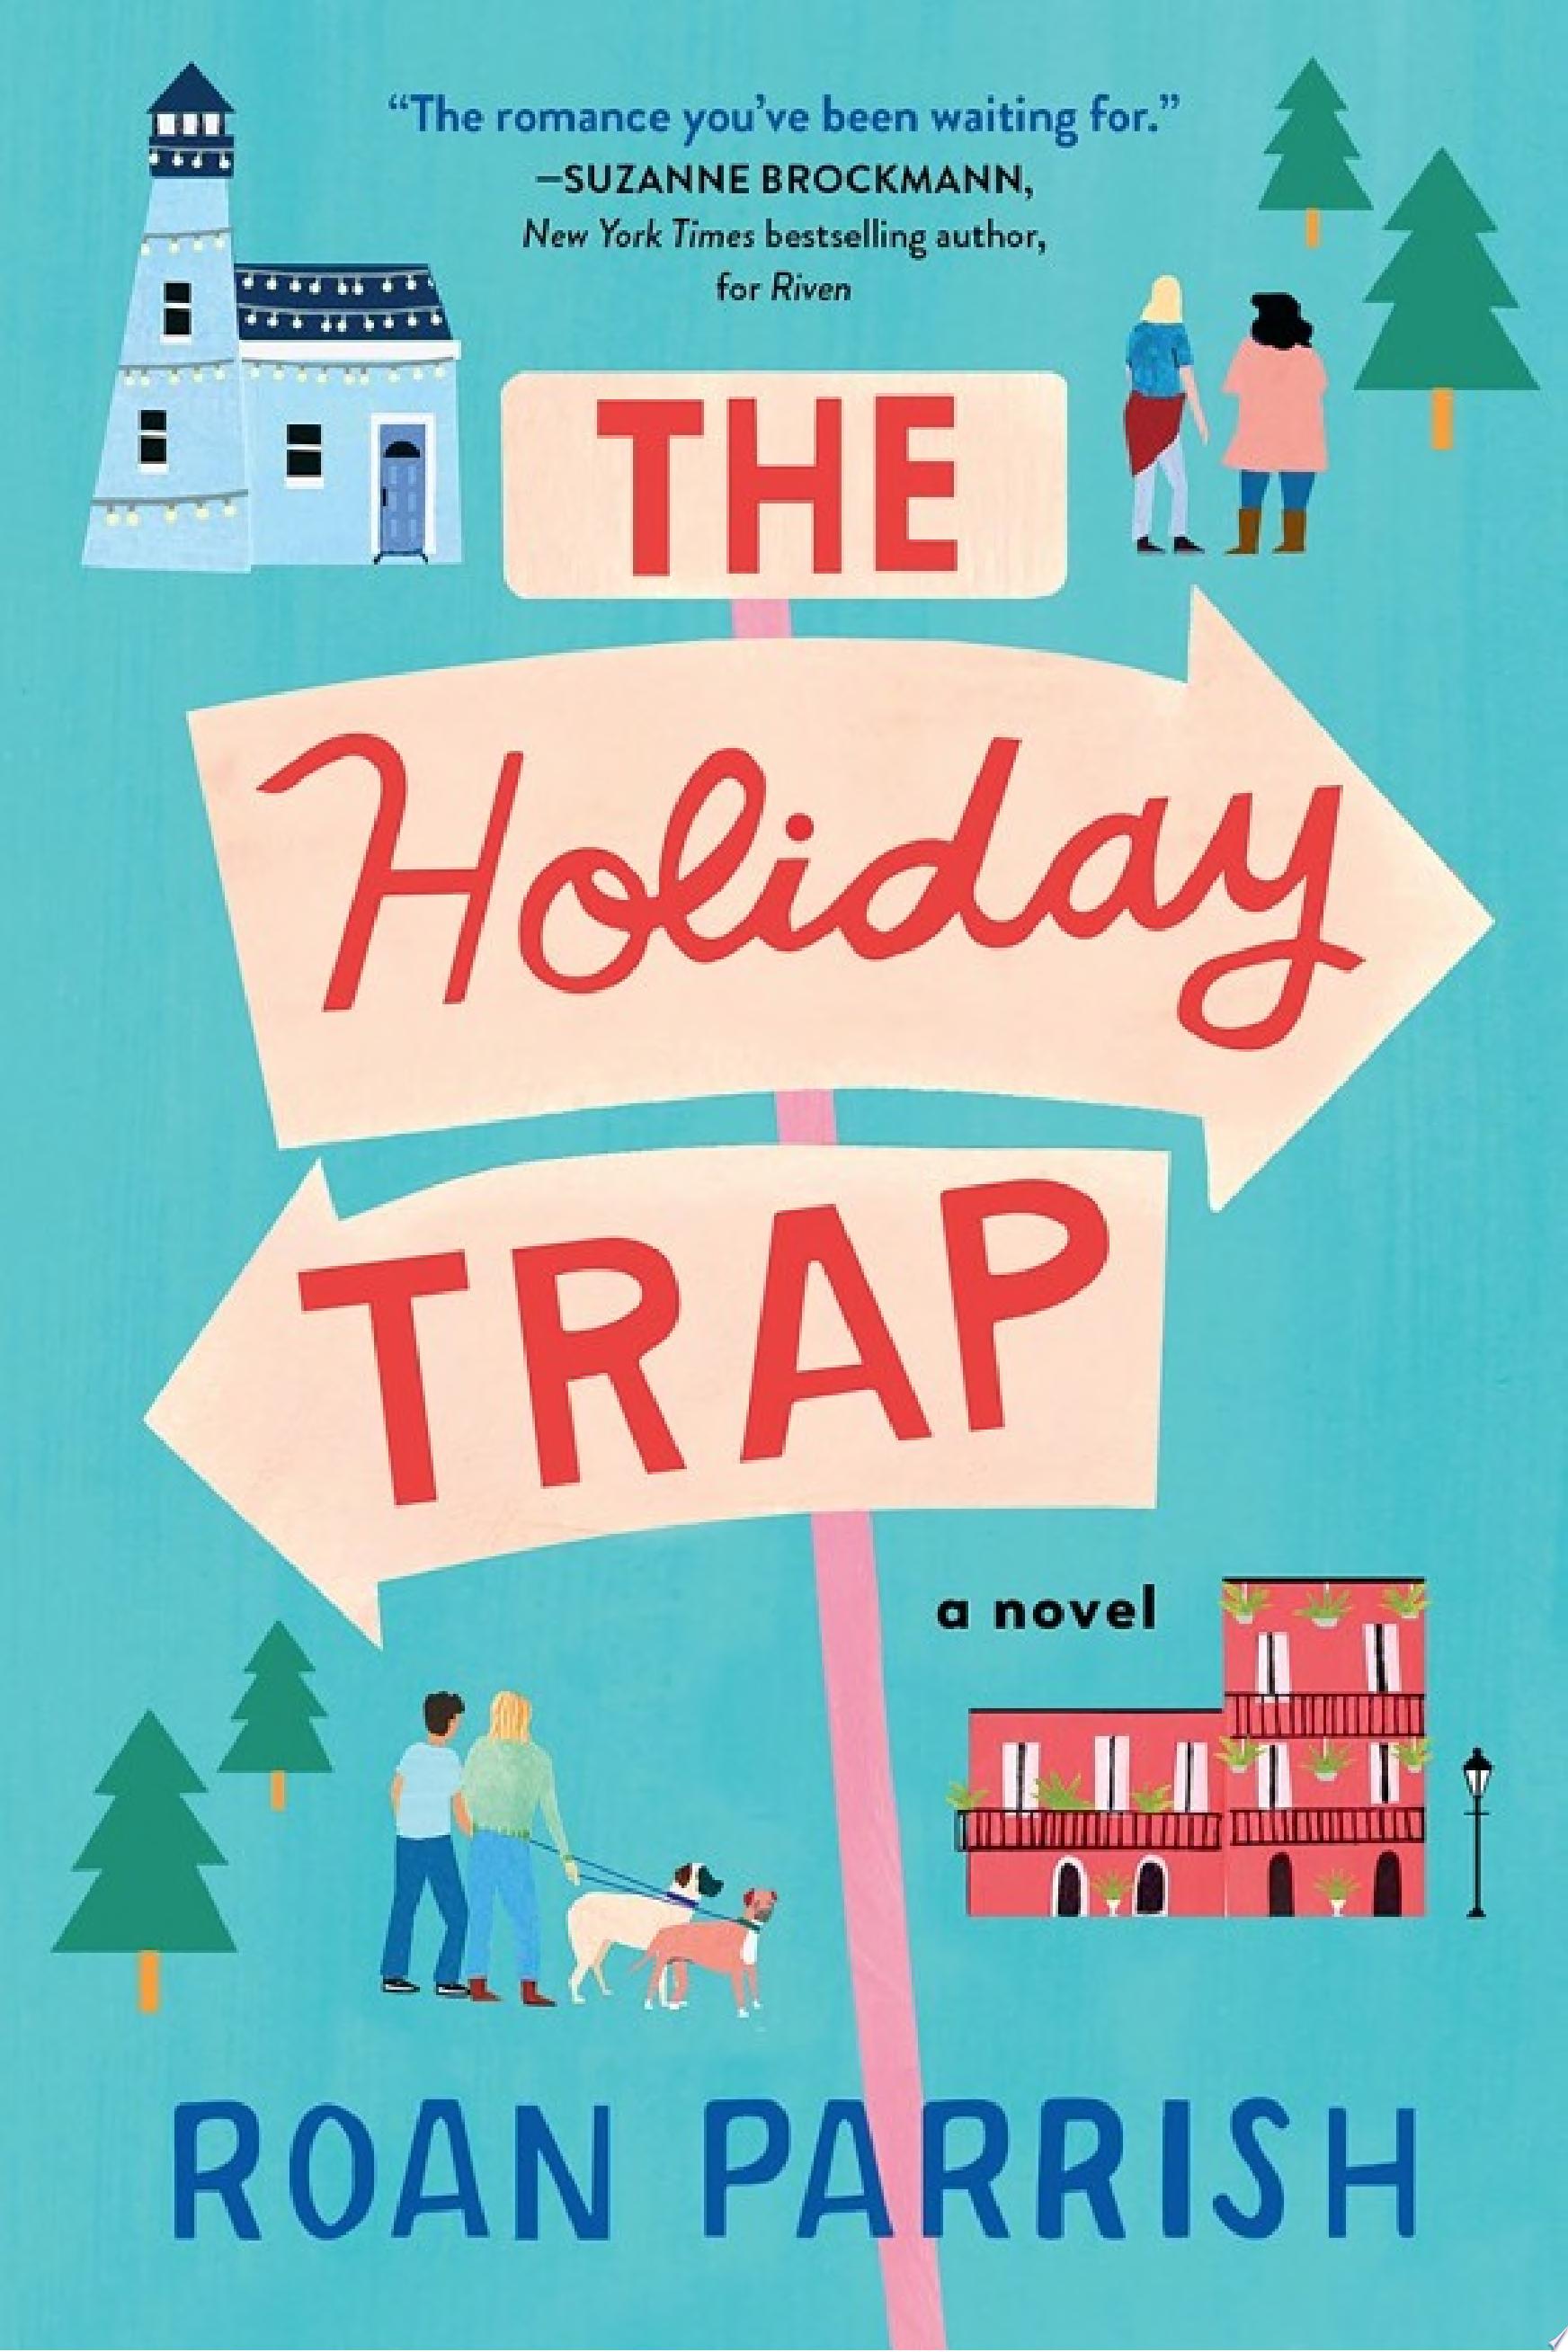 Image for "The Holiday Trap"